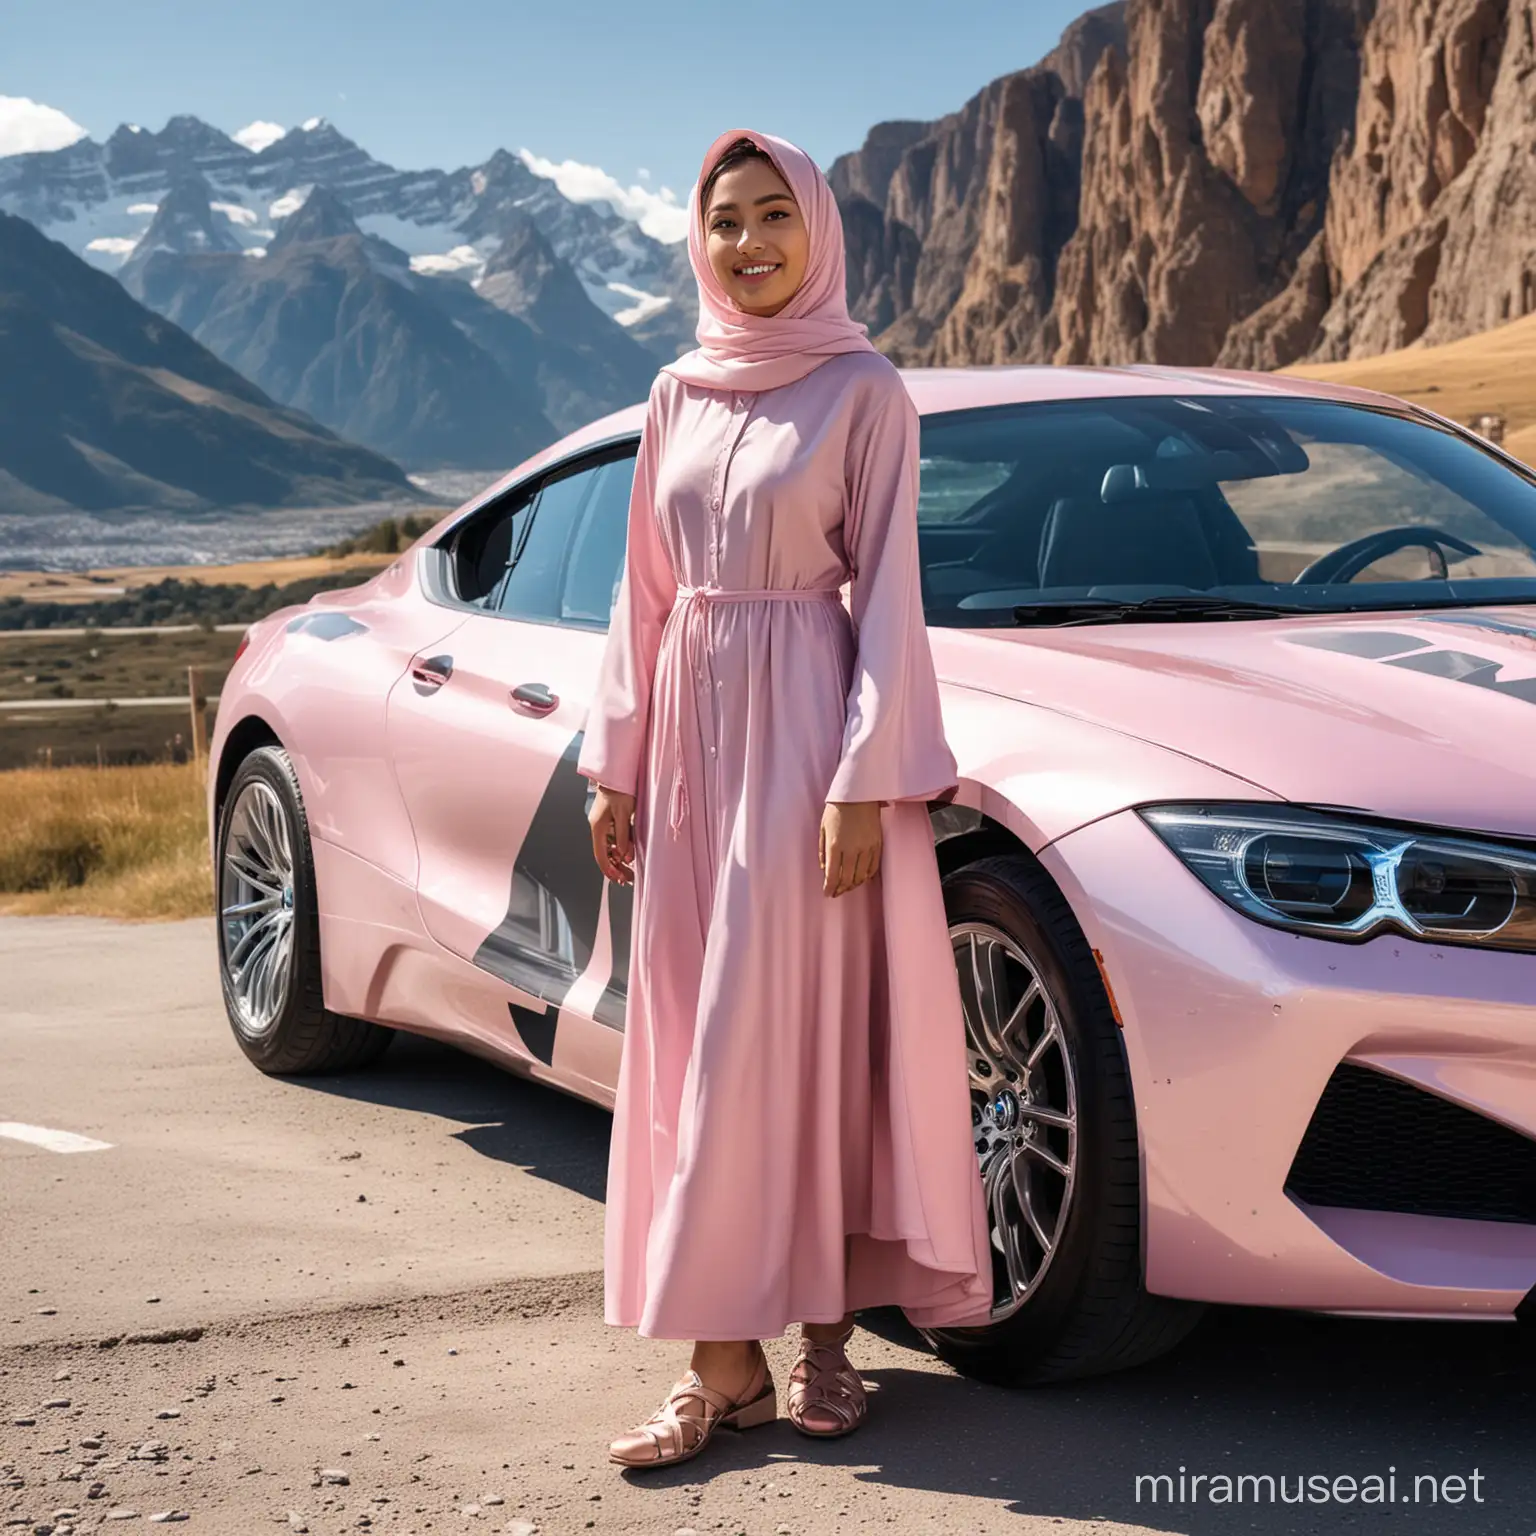 Asian Girl with Pink BMW Sport Car by Mountain Range under Blue Sky